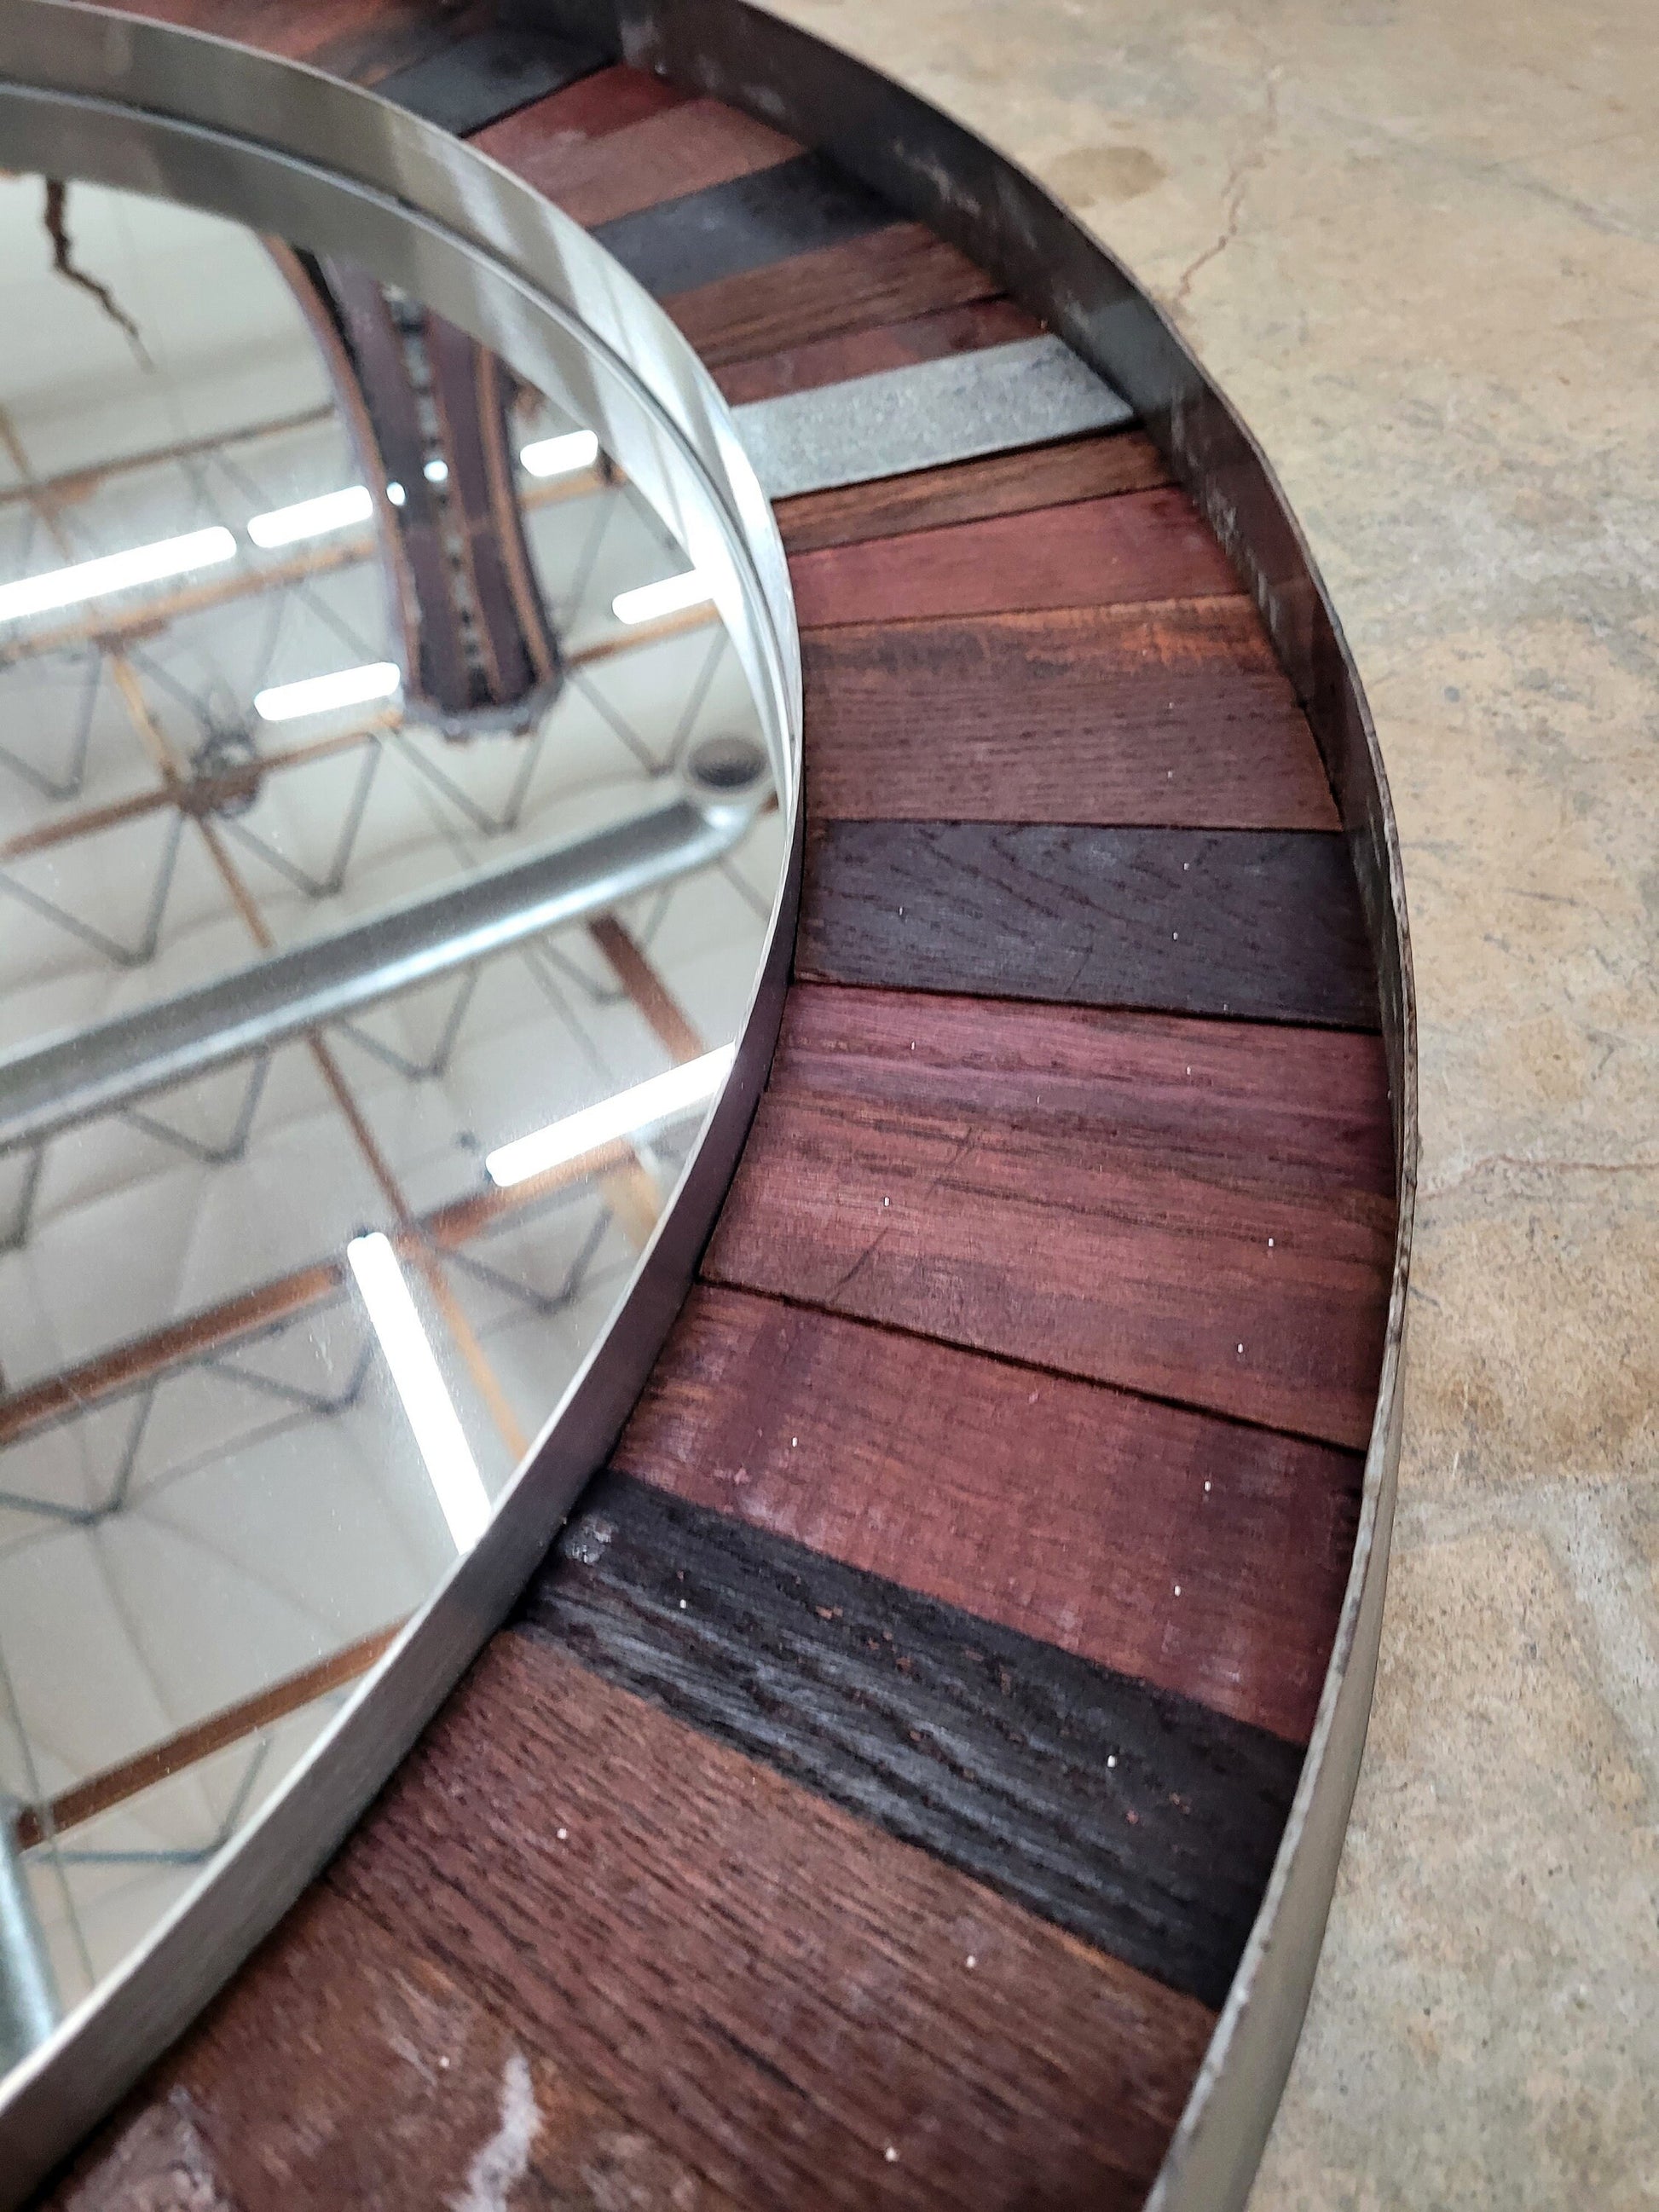 Wine Barrel Mirror - Zapis - Round Mirror made from retired Napa wine barrels 100% Recycled!